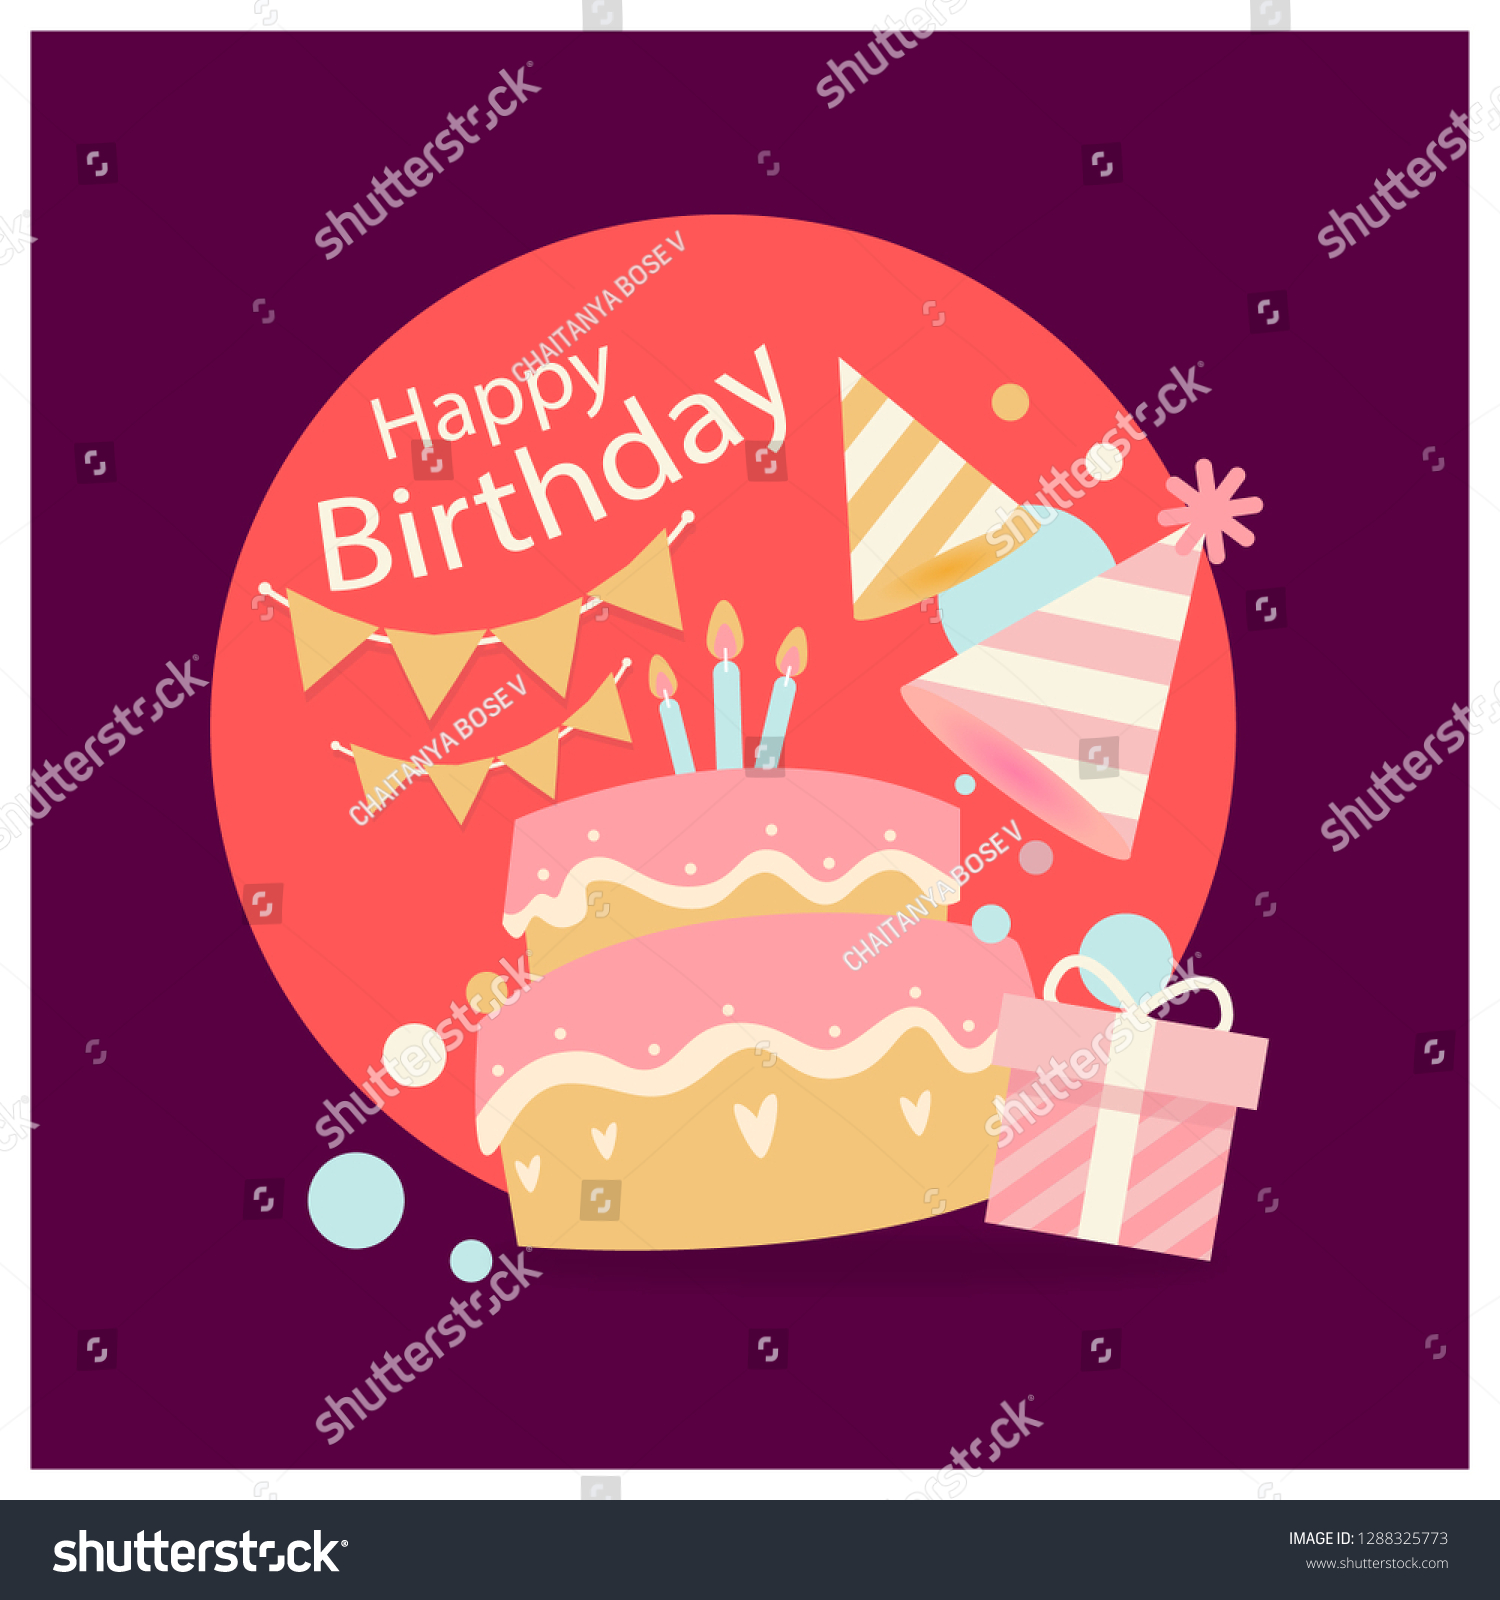 Happy Birthday Backgrounds Stock Vector Royalty Free 1288325773